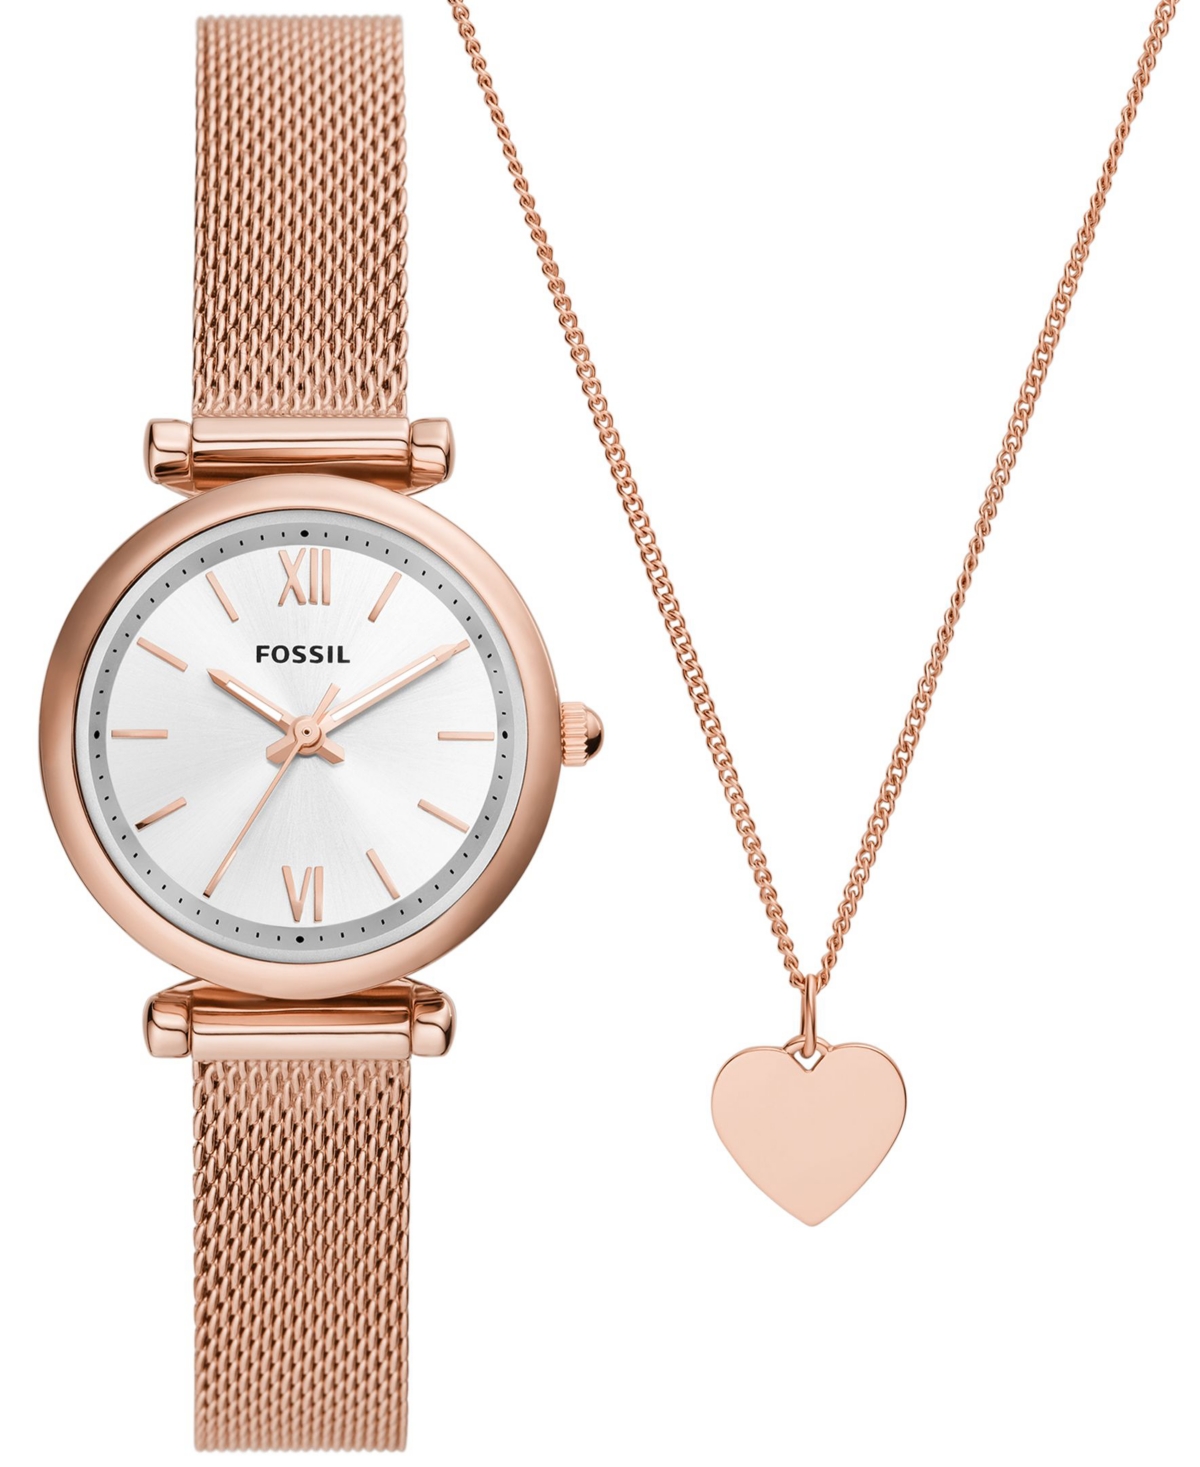 FOSSIL WOMEN'S CARLIE THREE-HAND ROSE GOLD-TONE STAINLESS STEEL MESH WATCH 28MM AND NECKLACE BOX GIFT SET